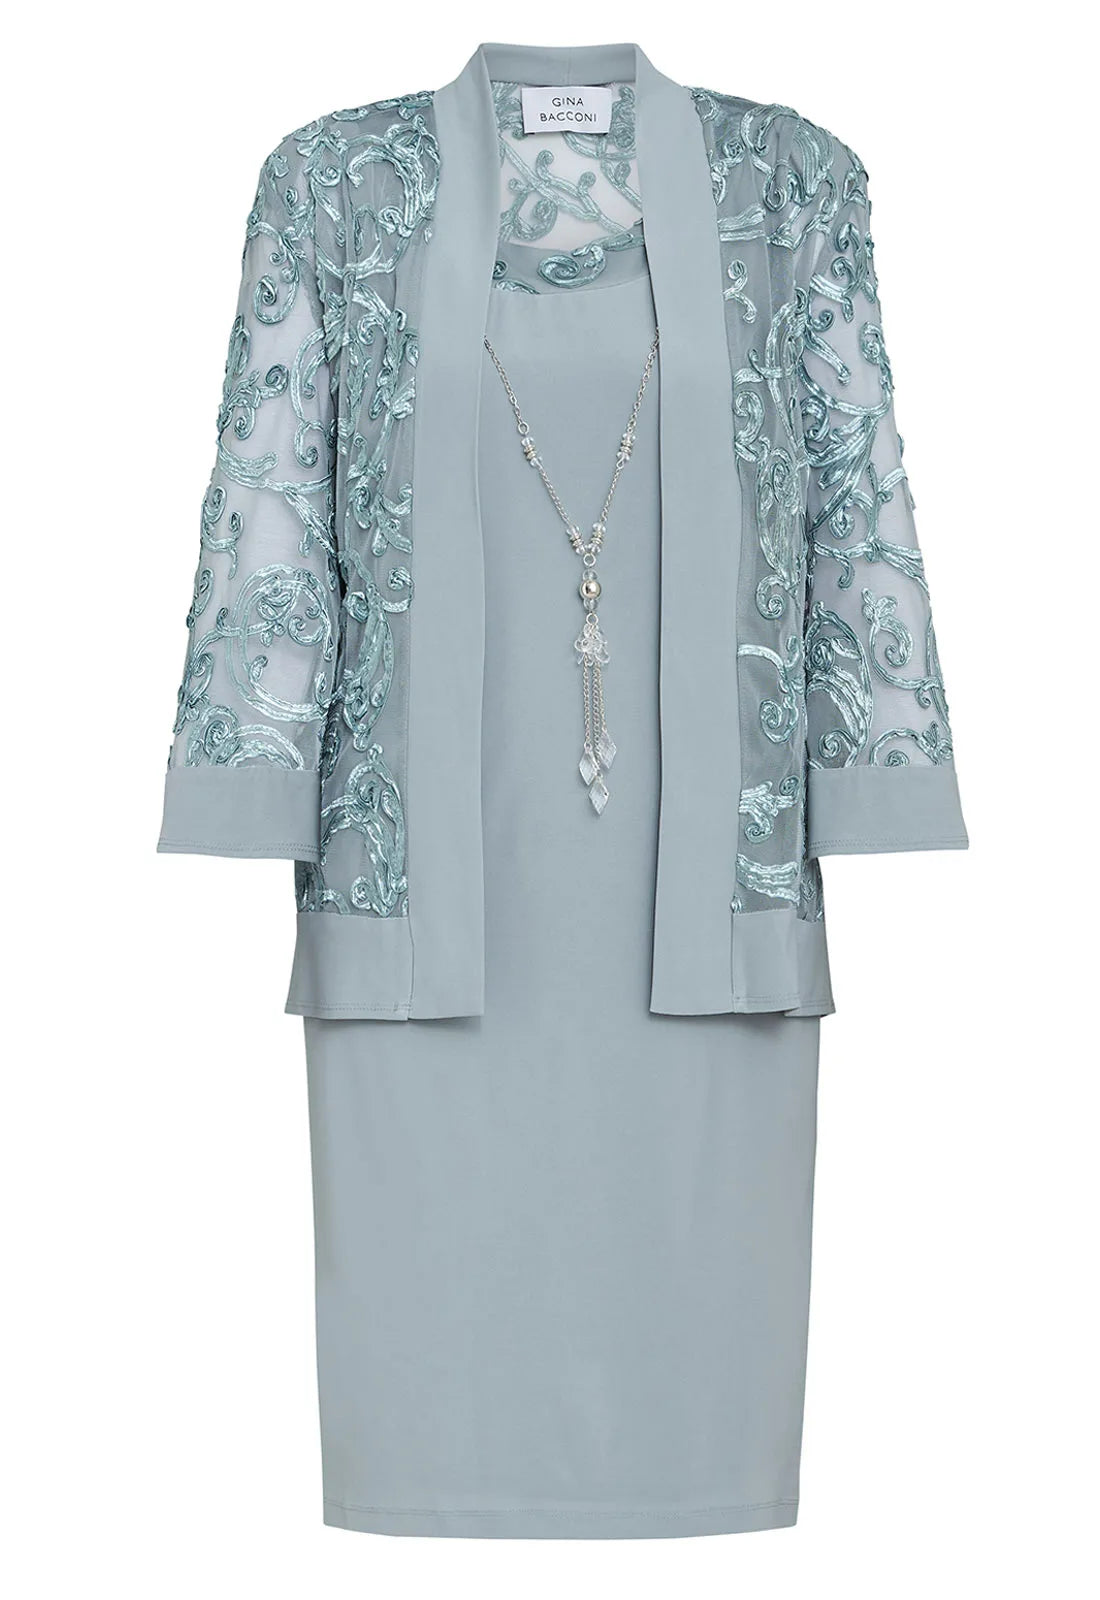 Gina Bacconi Sage Beverley Dress and Jacket with Necklace